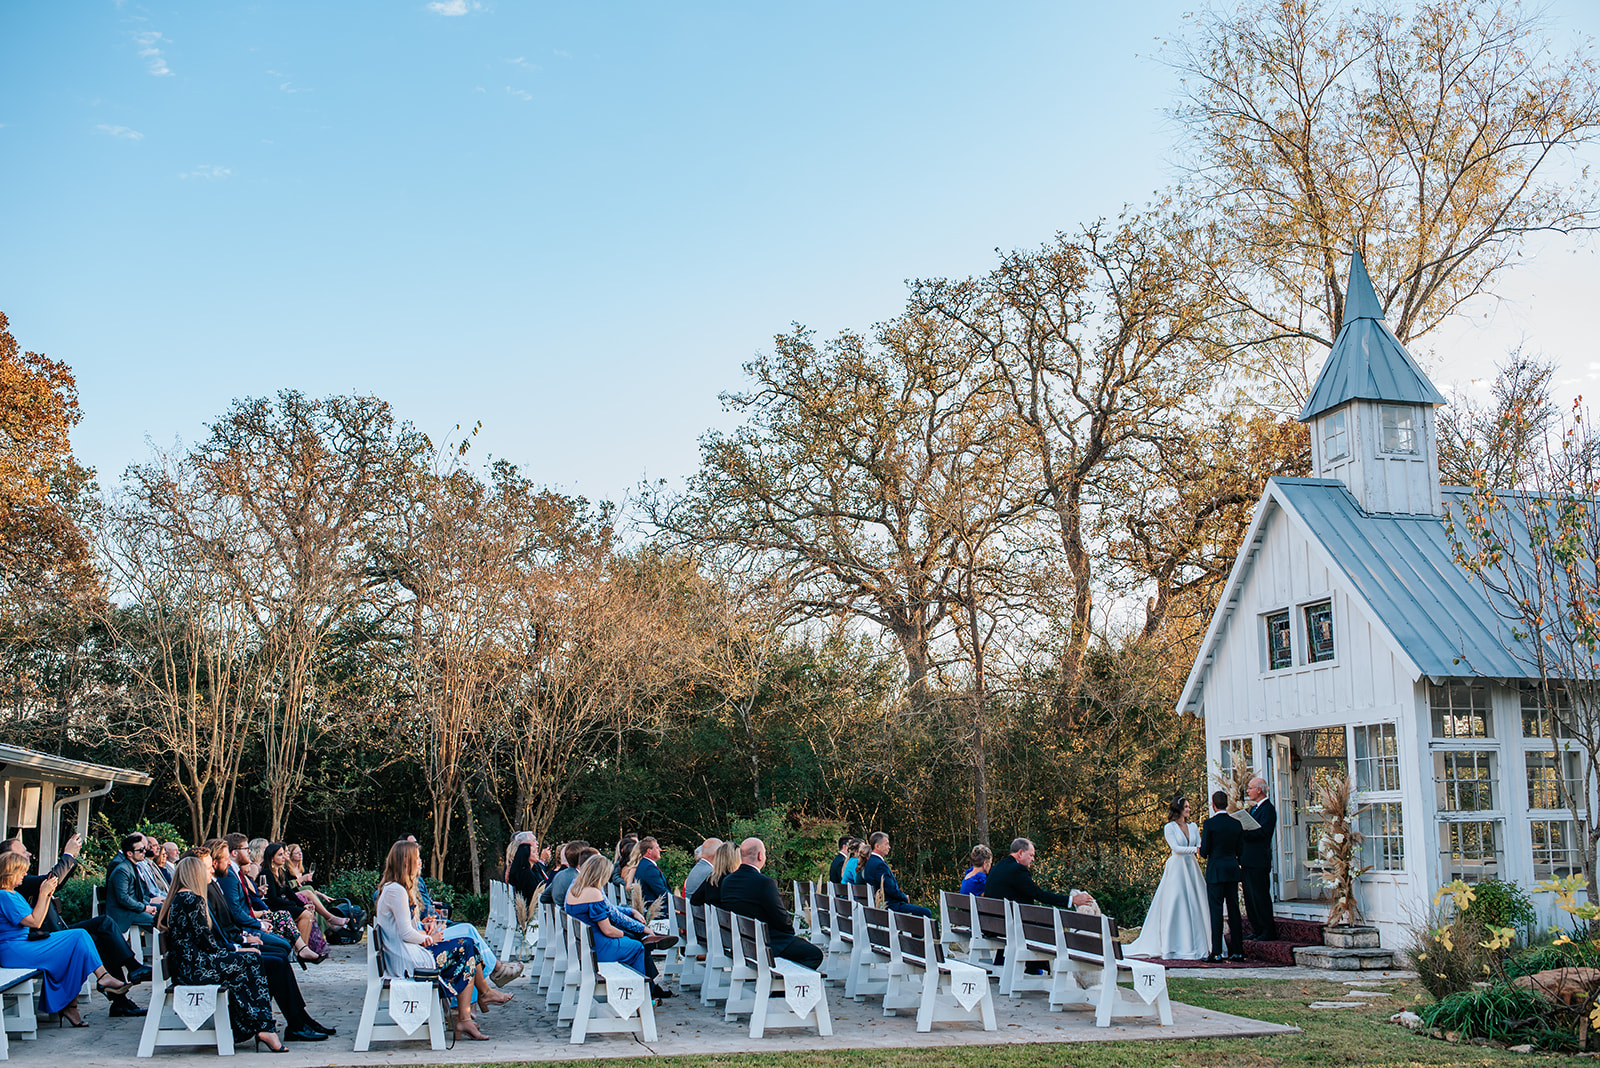 A side view of the alfresco intimate wedding ceremony in Aggieland at 7F Lodge.